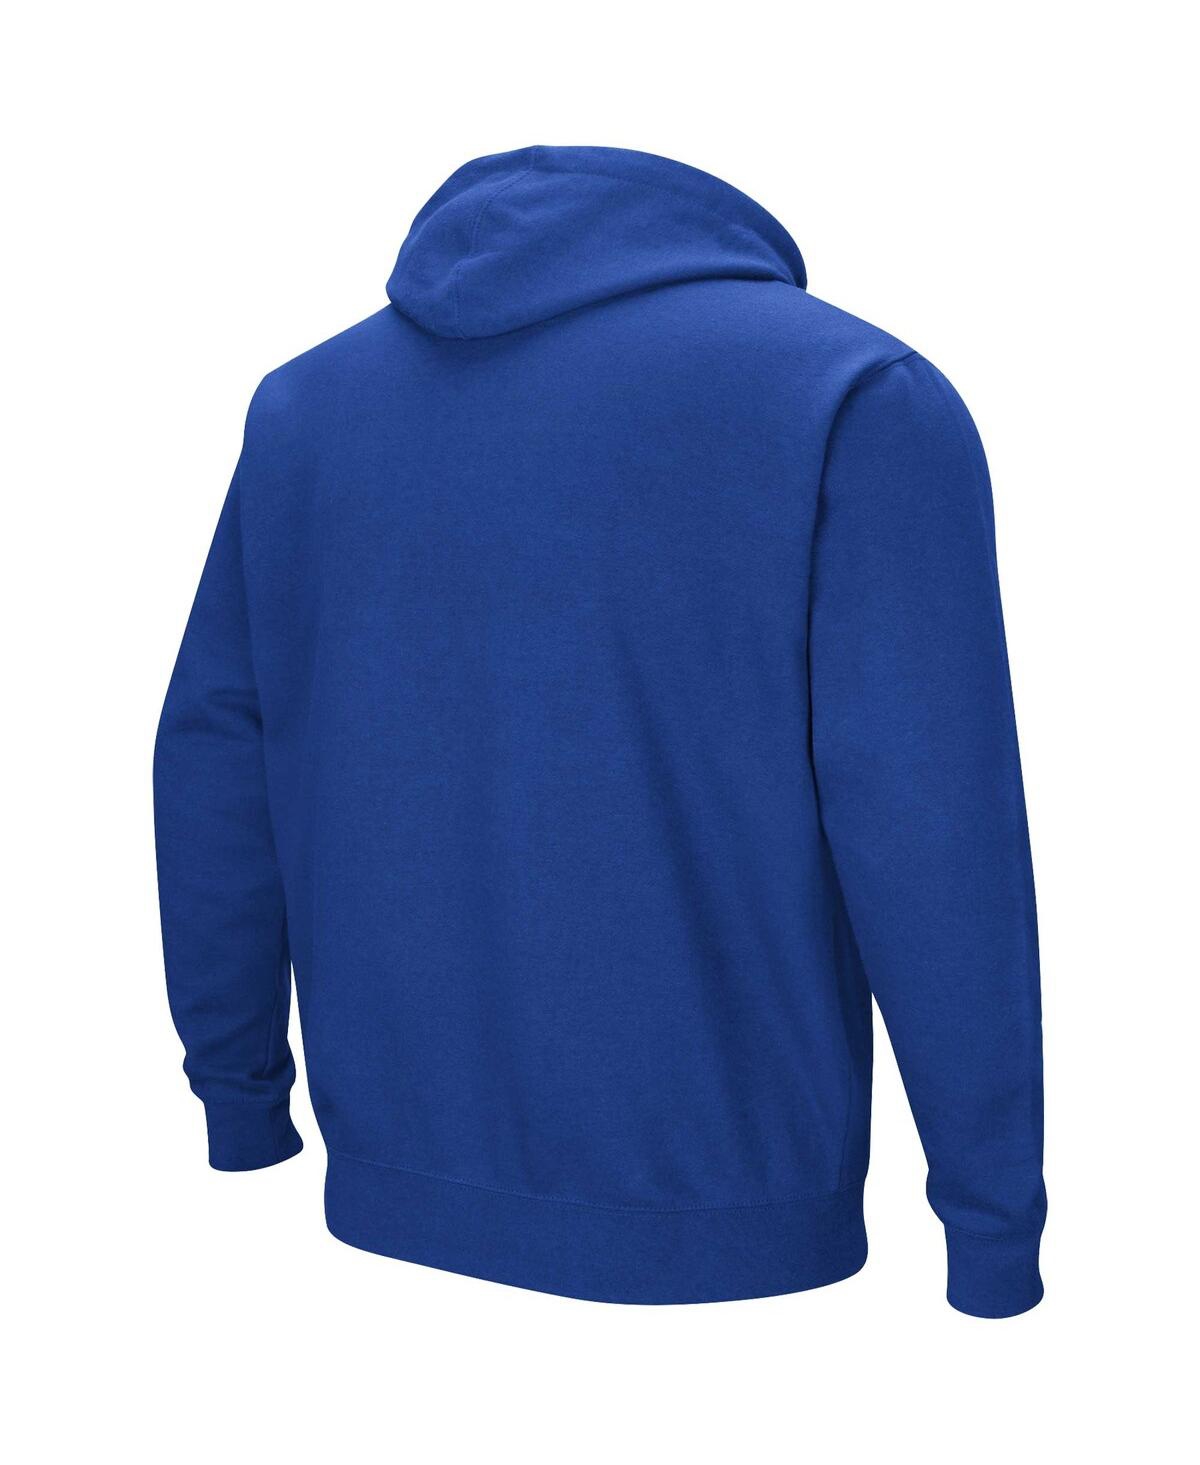 Shop Colosseum Men's  Blue Morehead State Eagles Arch & Team Logo 3.0 Pullover Hoodie